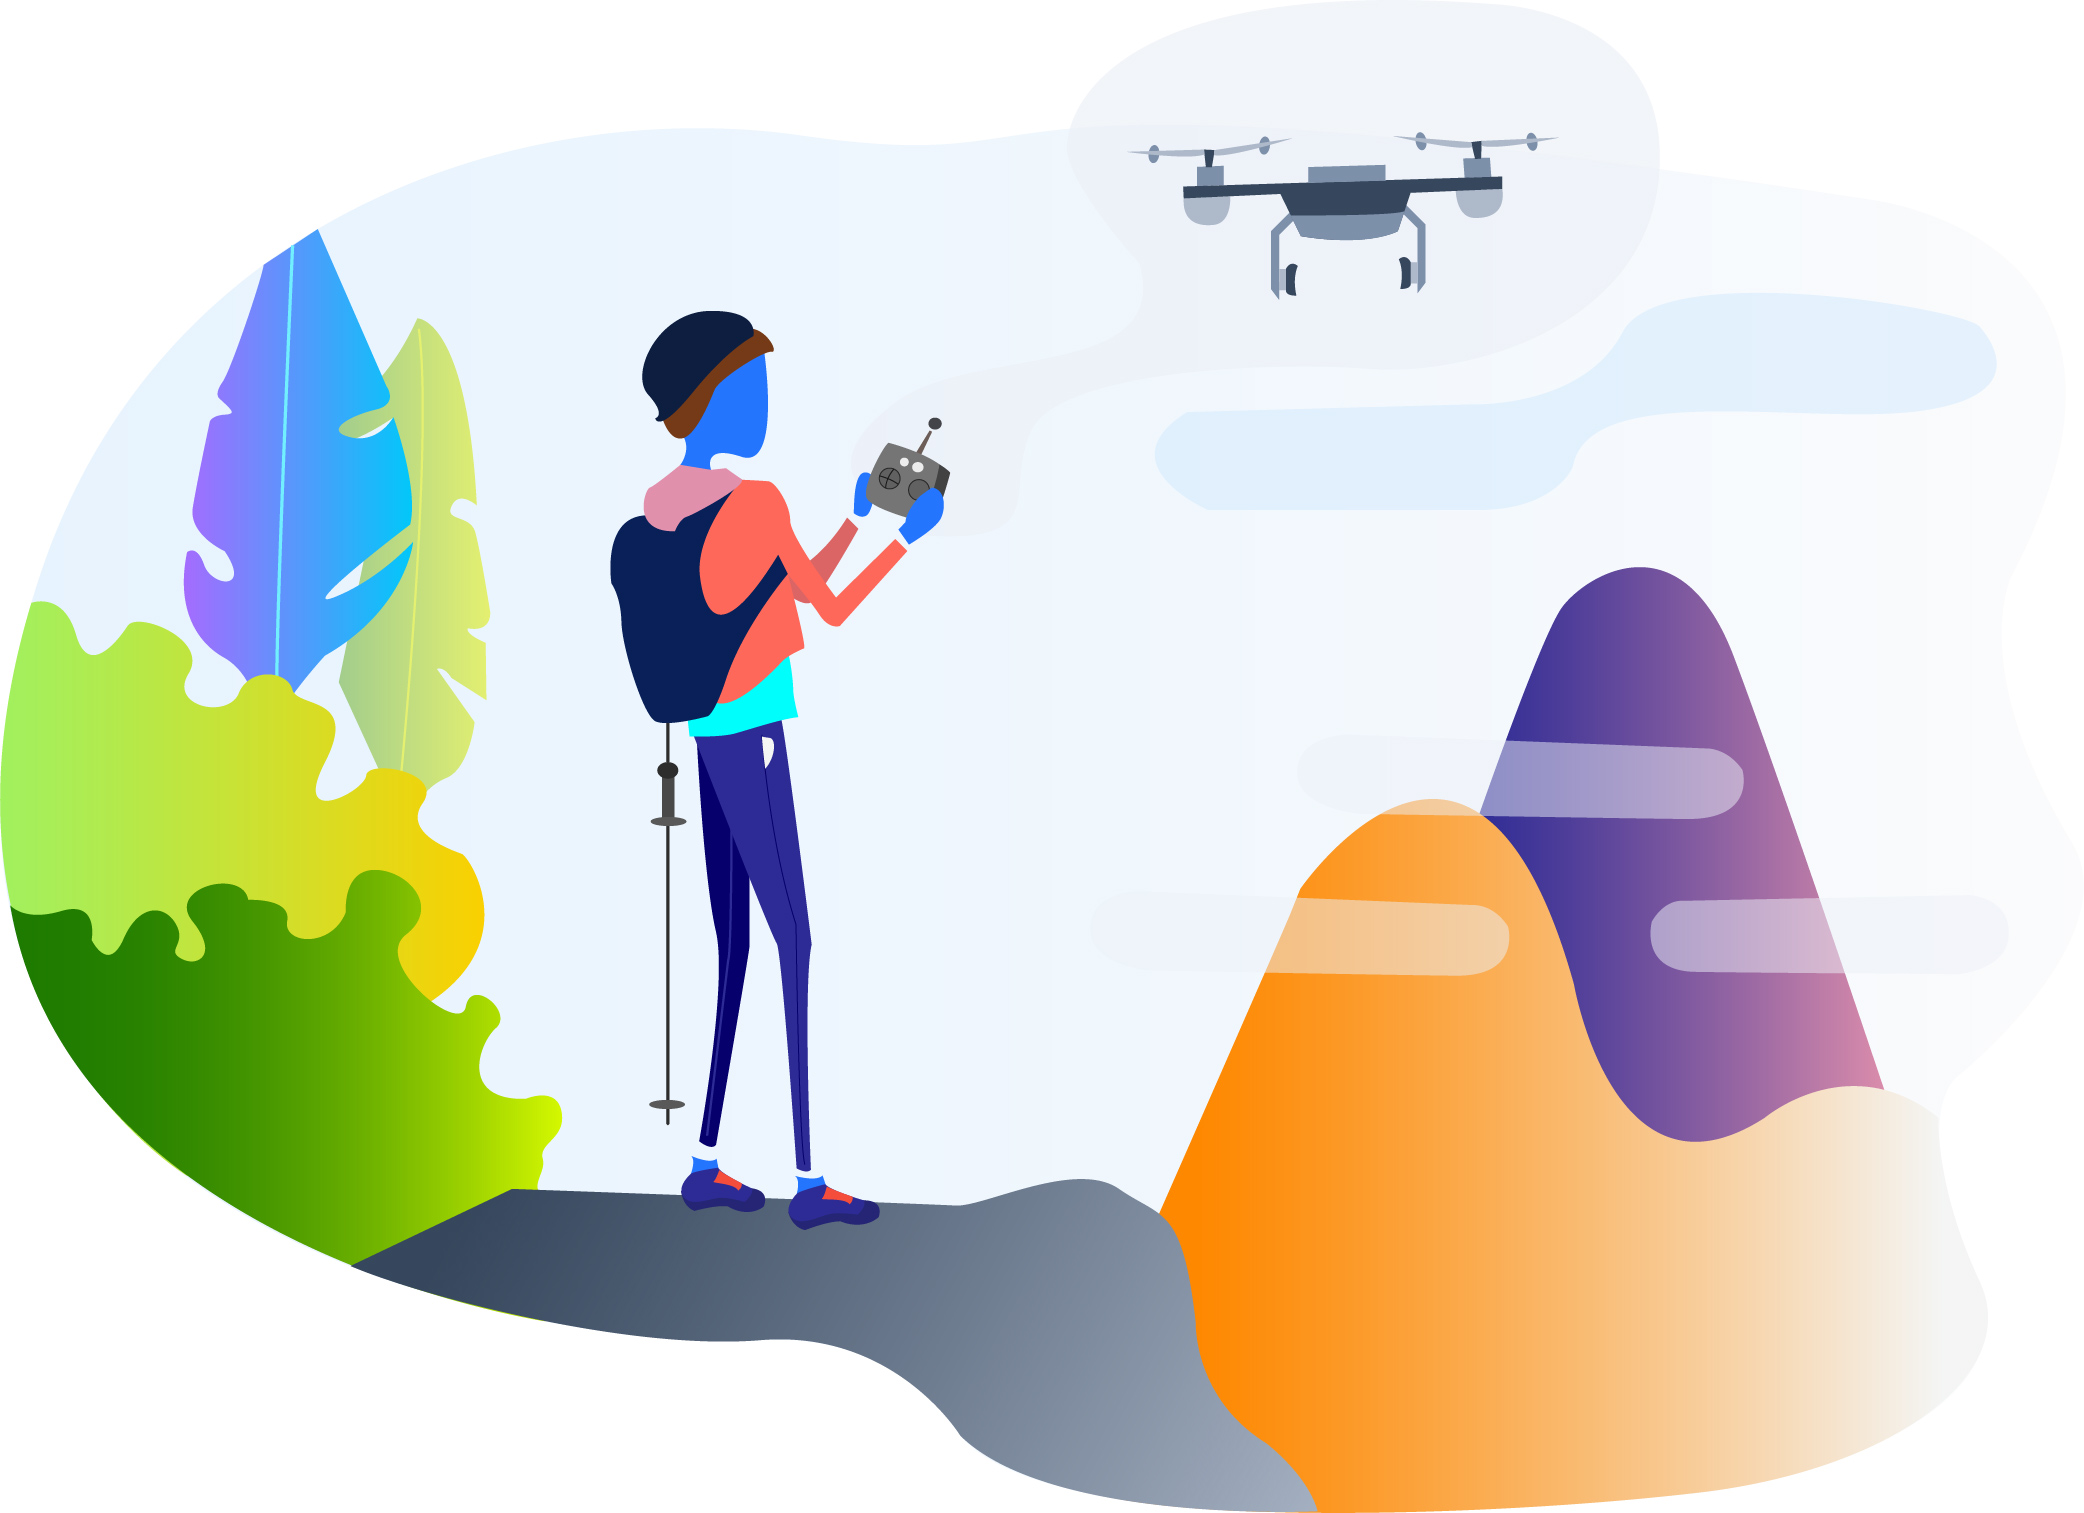 Cartoon of someone flying a drone in the mountains